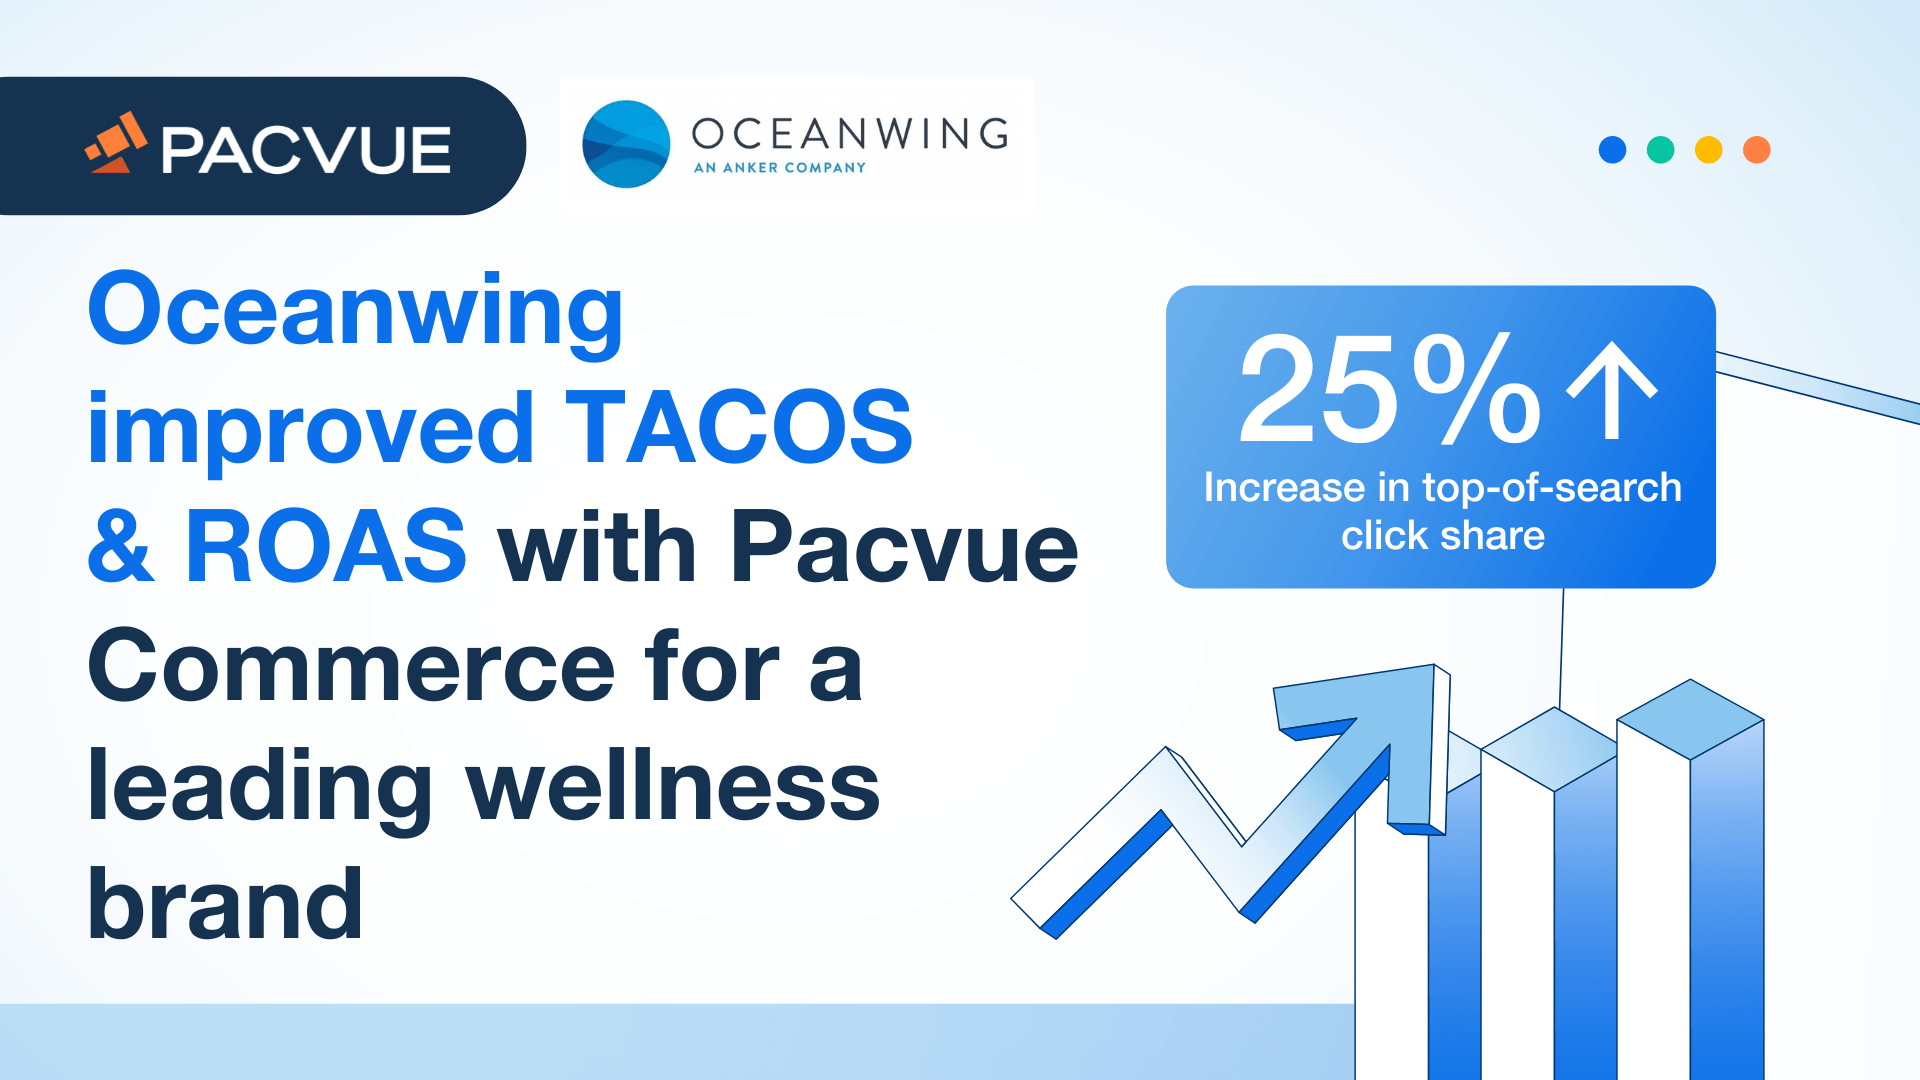 Oceanwing improved TACOS & ROAS with Pacvue Commerce for a leading wellness brand